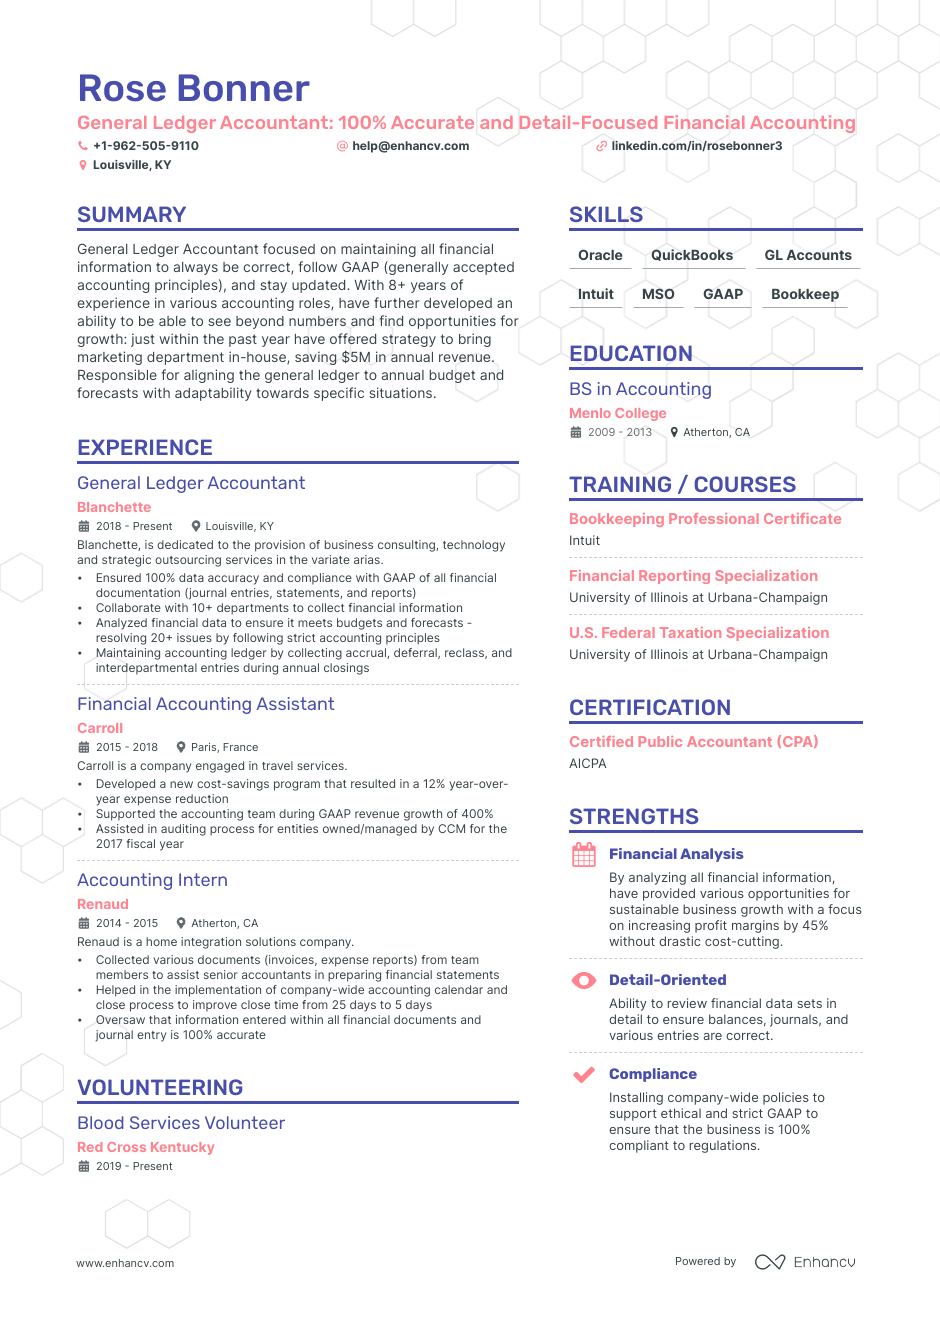 General ledger accountant resume example